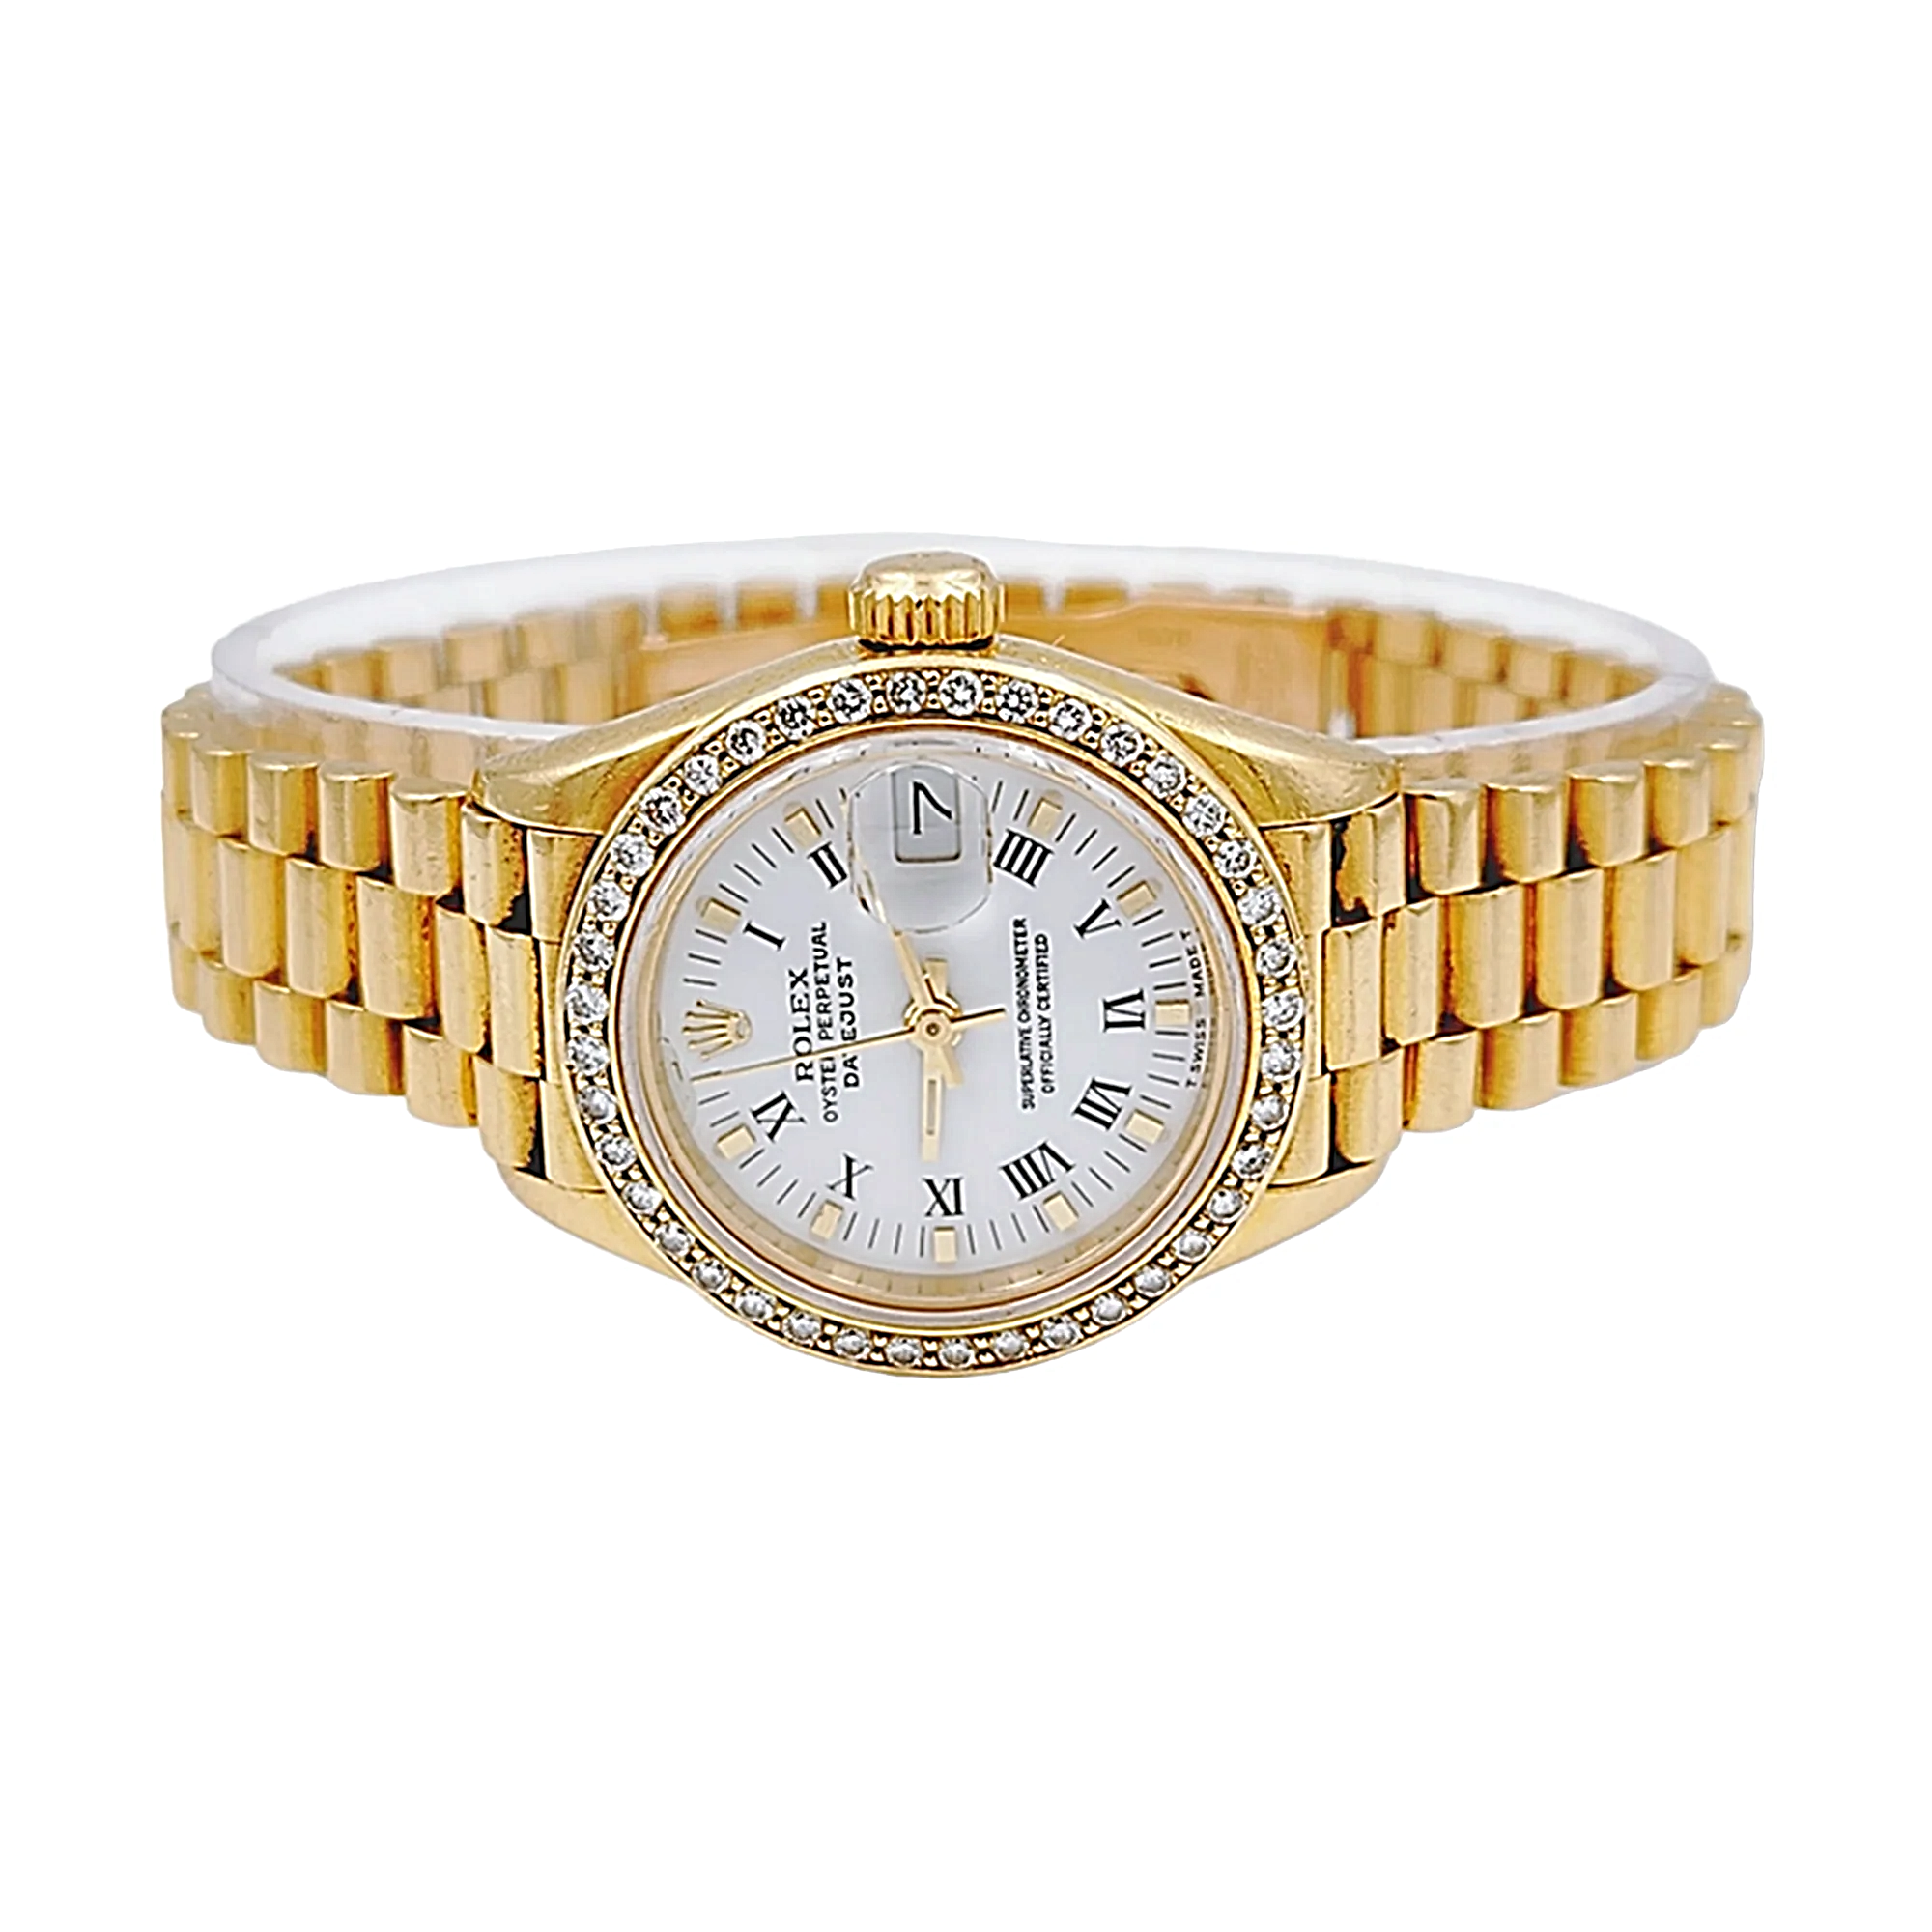 Ladies Rolex 26mm Presidential 18K Yellow Gold Watch with White Roman Numeral Dial and Diamond Bezel. (Pre-Owned 69178)